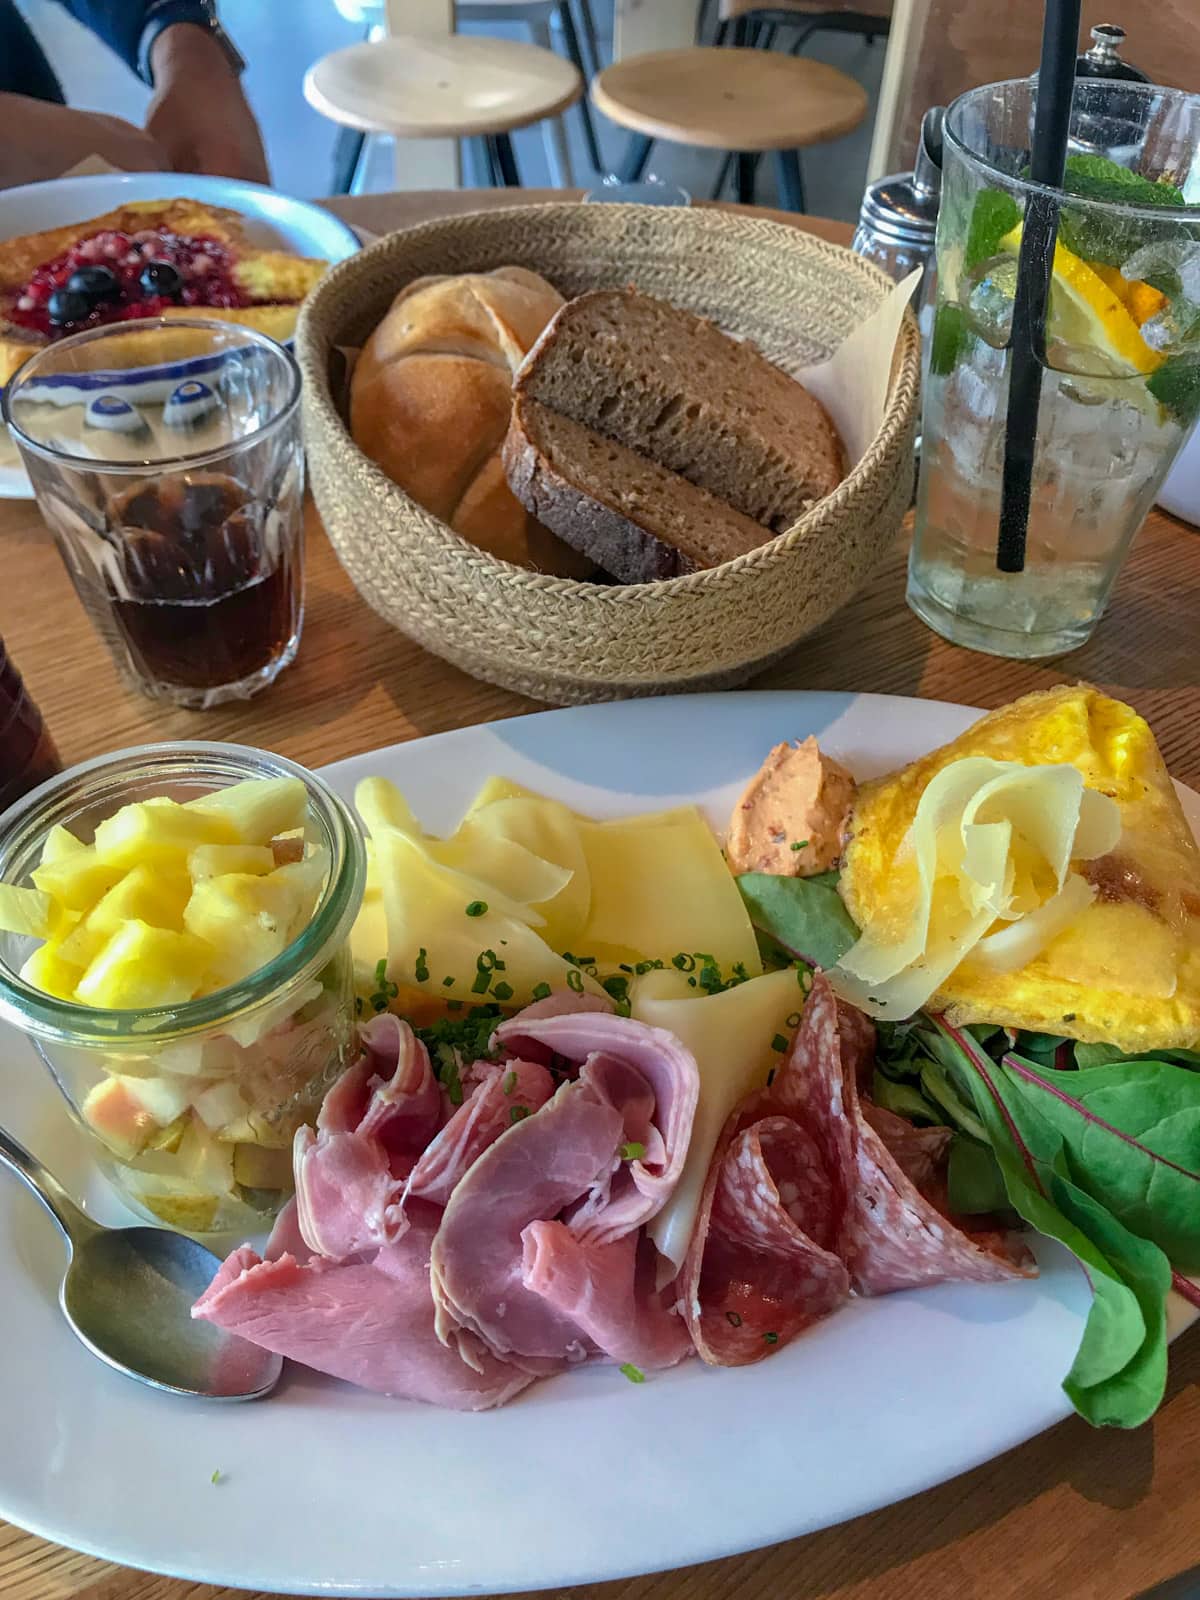 An oval-shaped plate on a table, on which is served some cold cuts of meat, cheese, eggs, and a cup of fruit. In the background is a glass of Coca Cola and a small basket of bread